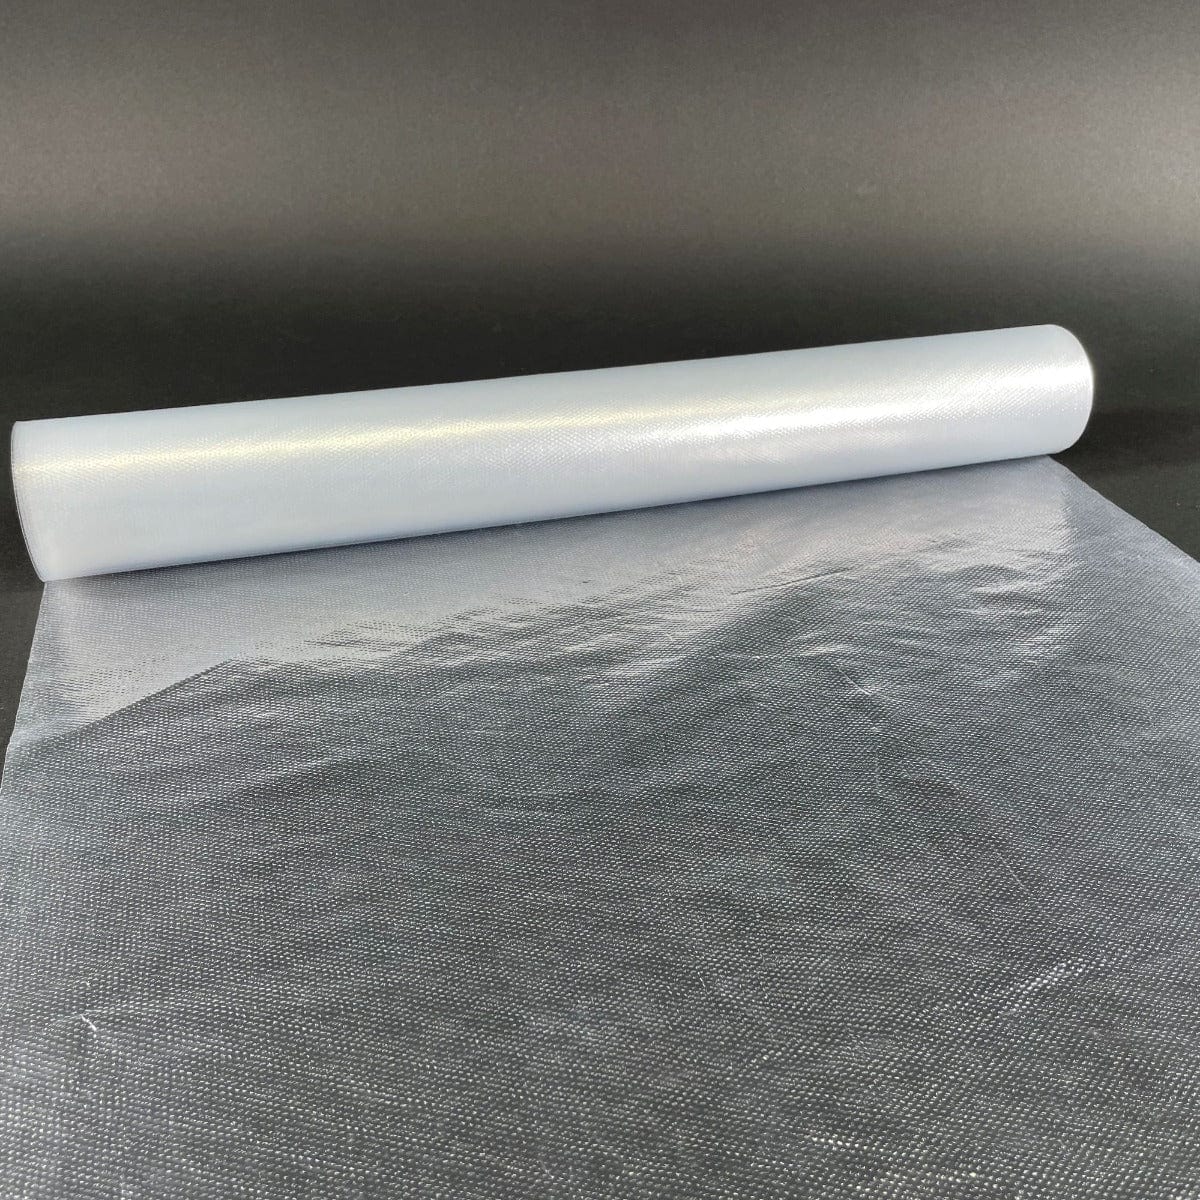 Gunold Thermofilm Heat Removable Embroidery Backing Film Per Metre